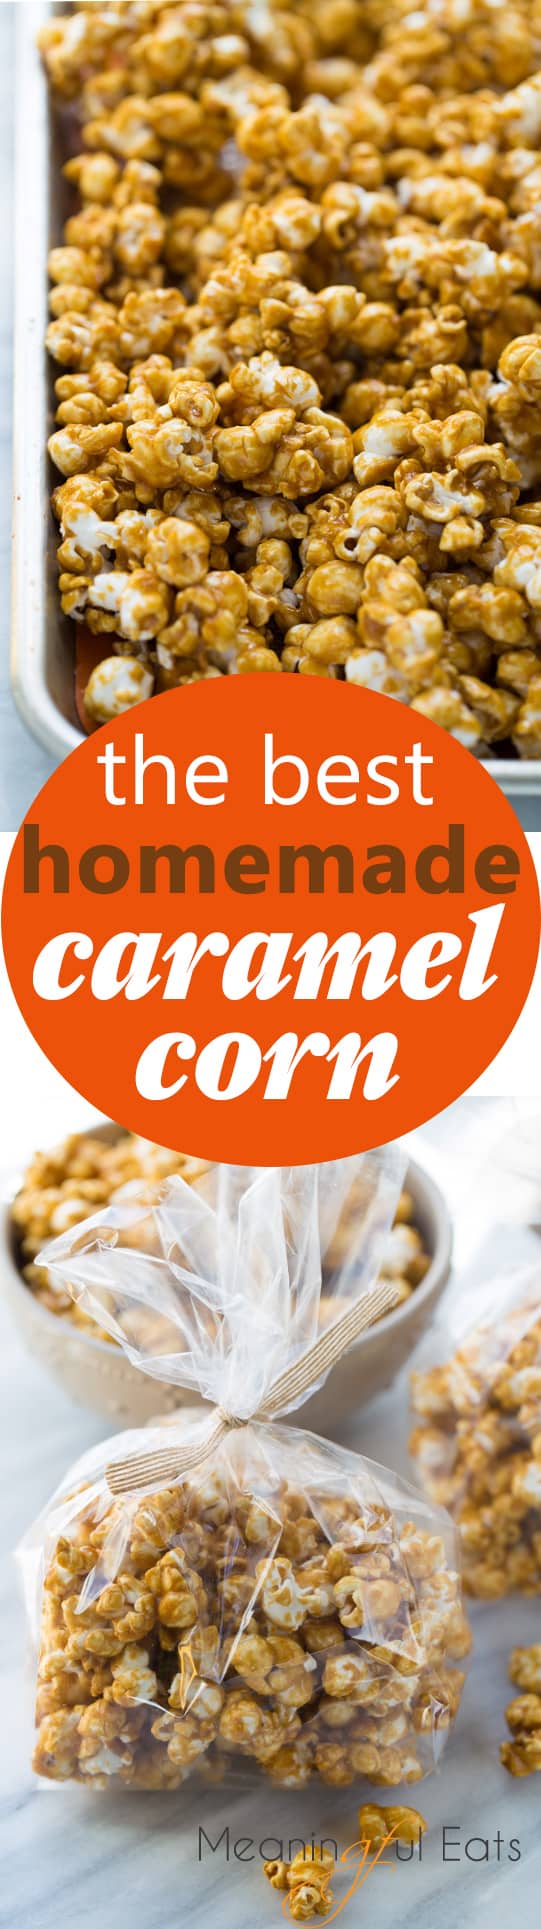 The Best Homemade Caramel Corn! Crispy caramel corn with the perfect mix of sweet and salty. A naturally gluten-free Halloween treat!